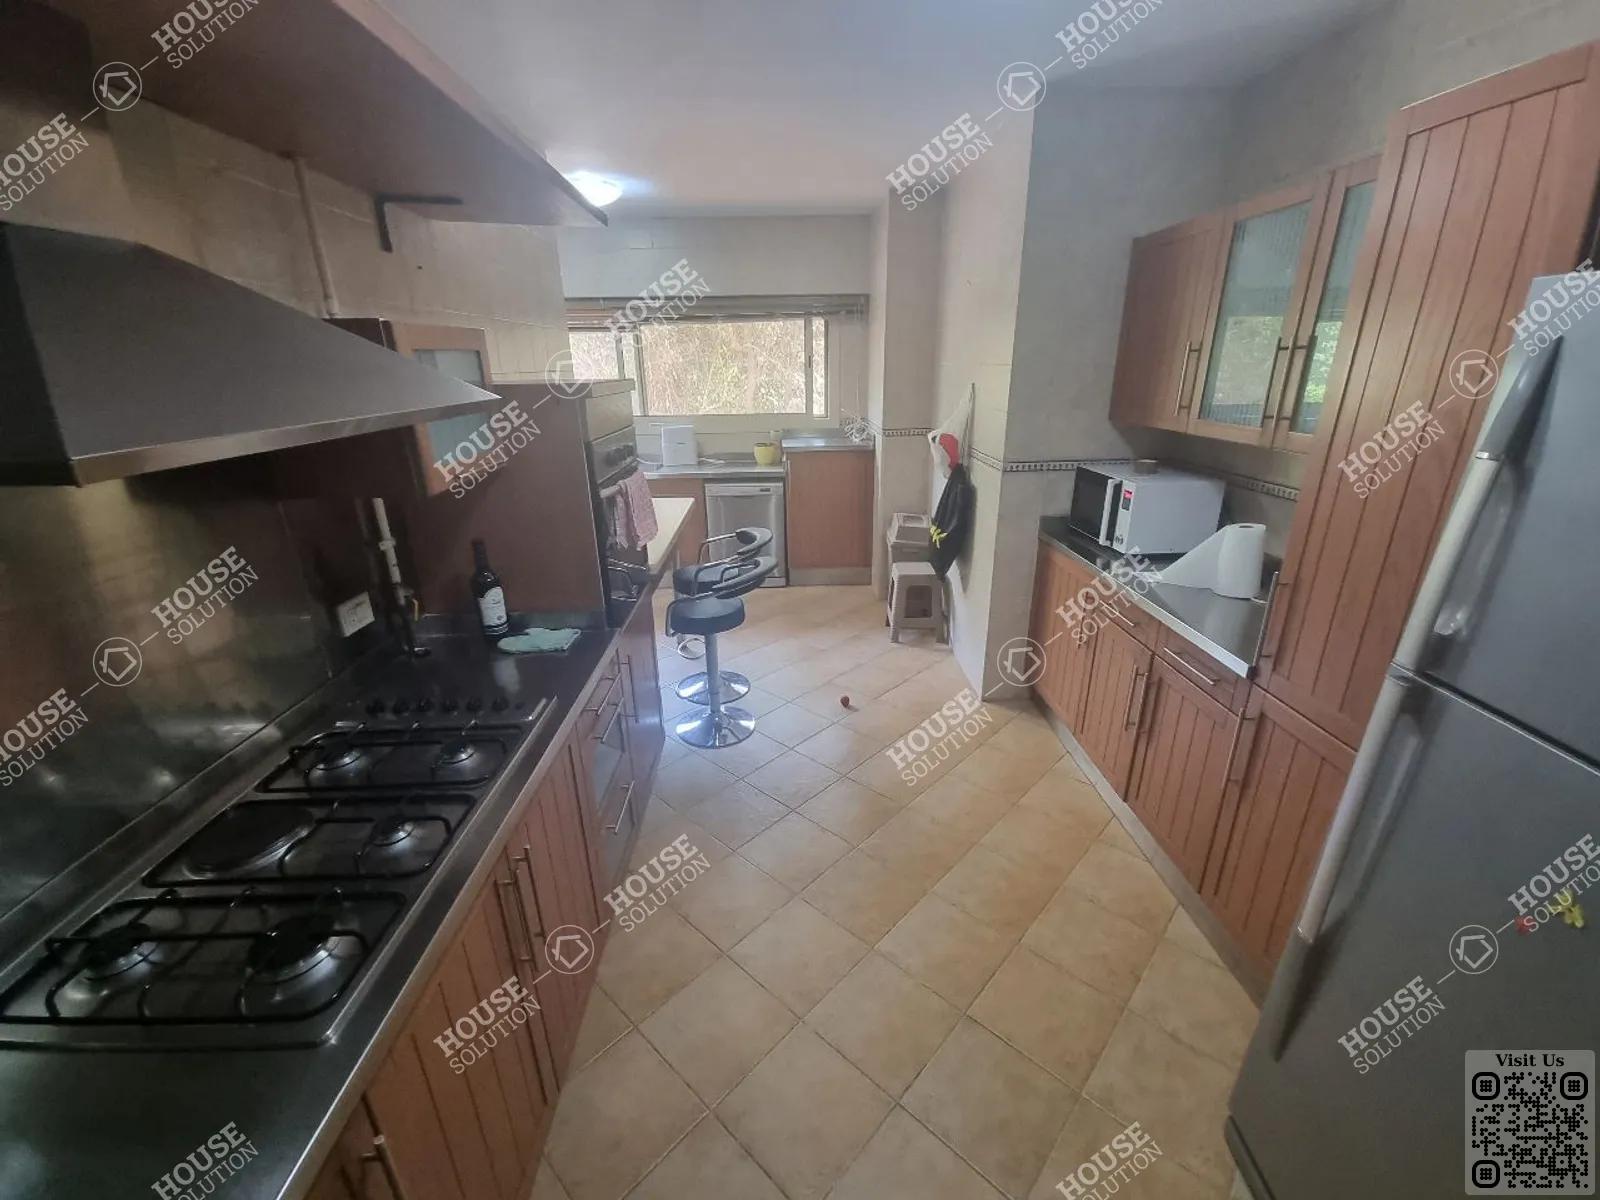 KITCHEN  @ Apartments For Rent In Maadi Maadi Sarayat Area: 350 m² consists of 4 Bedrooms 4 Bathrooms Modern furnished 5 stars #3142-0